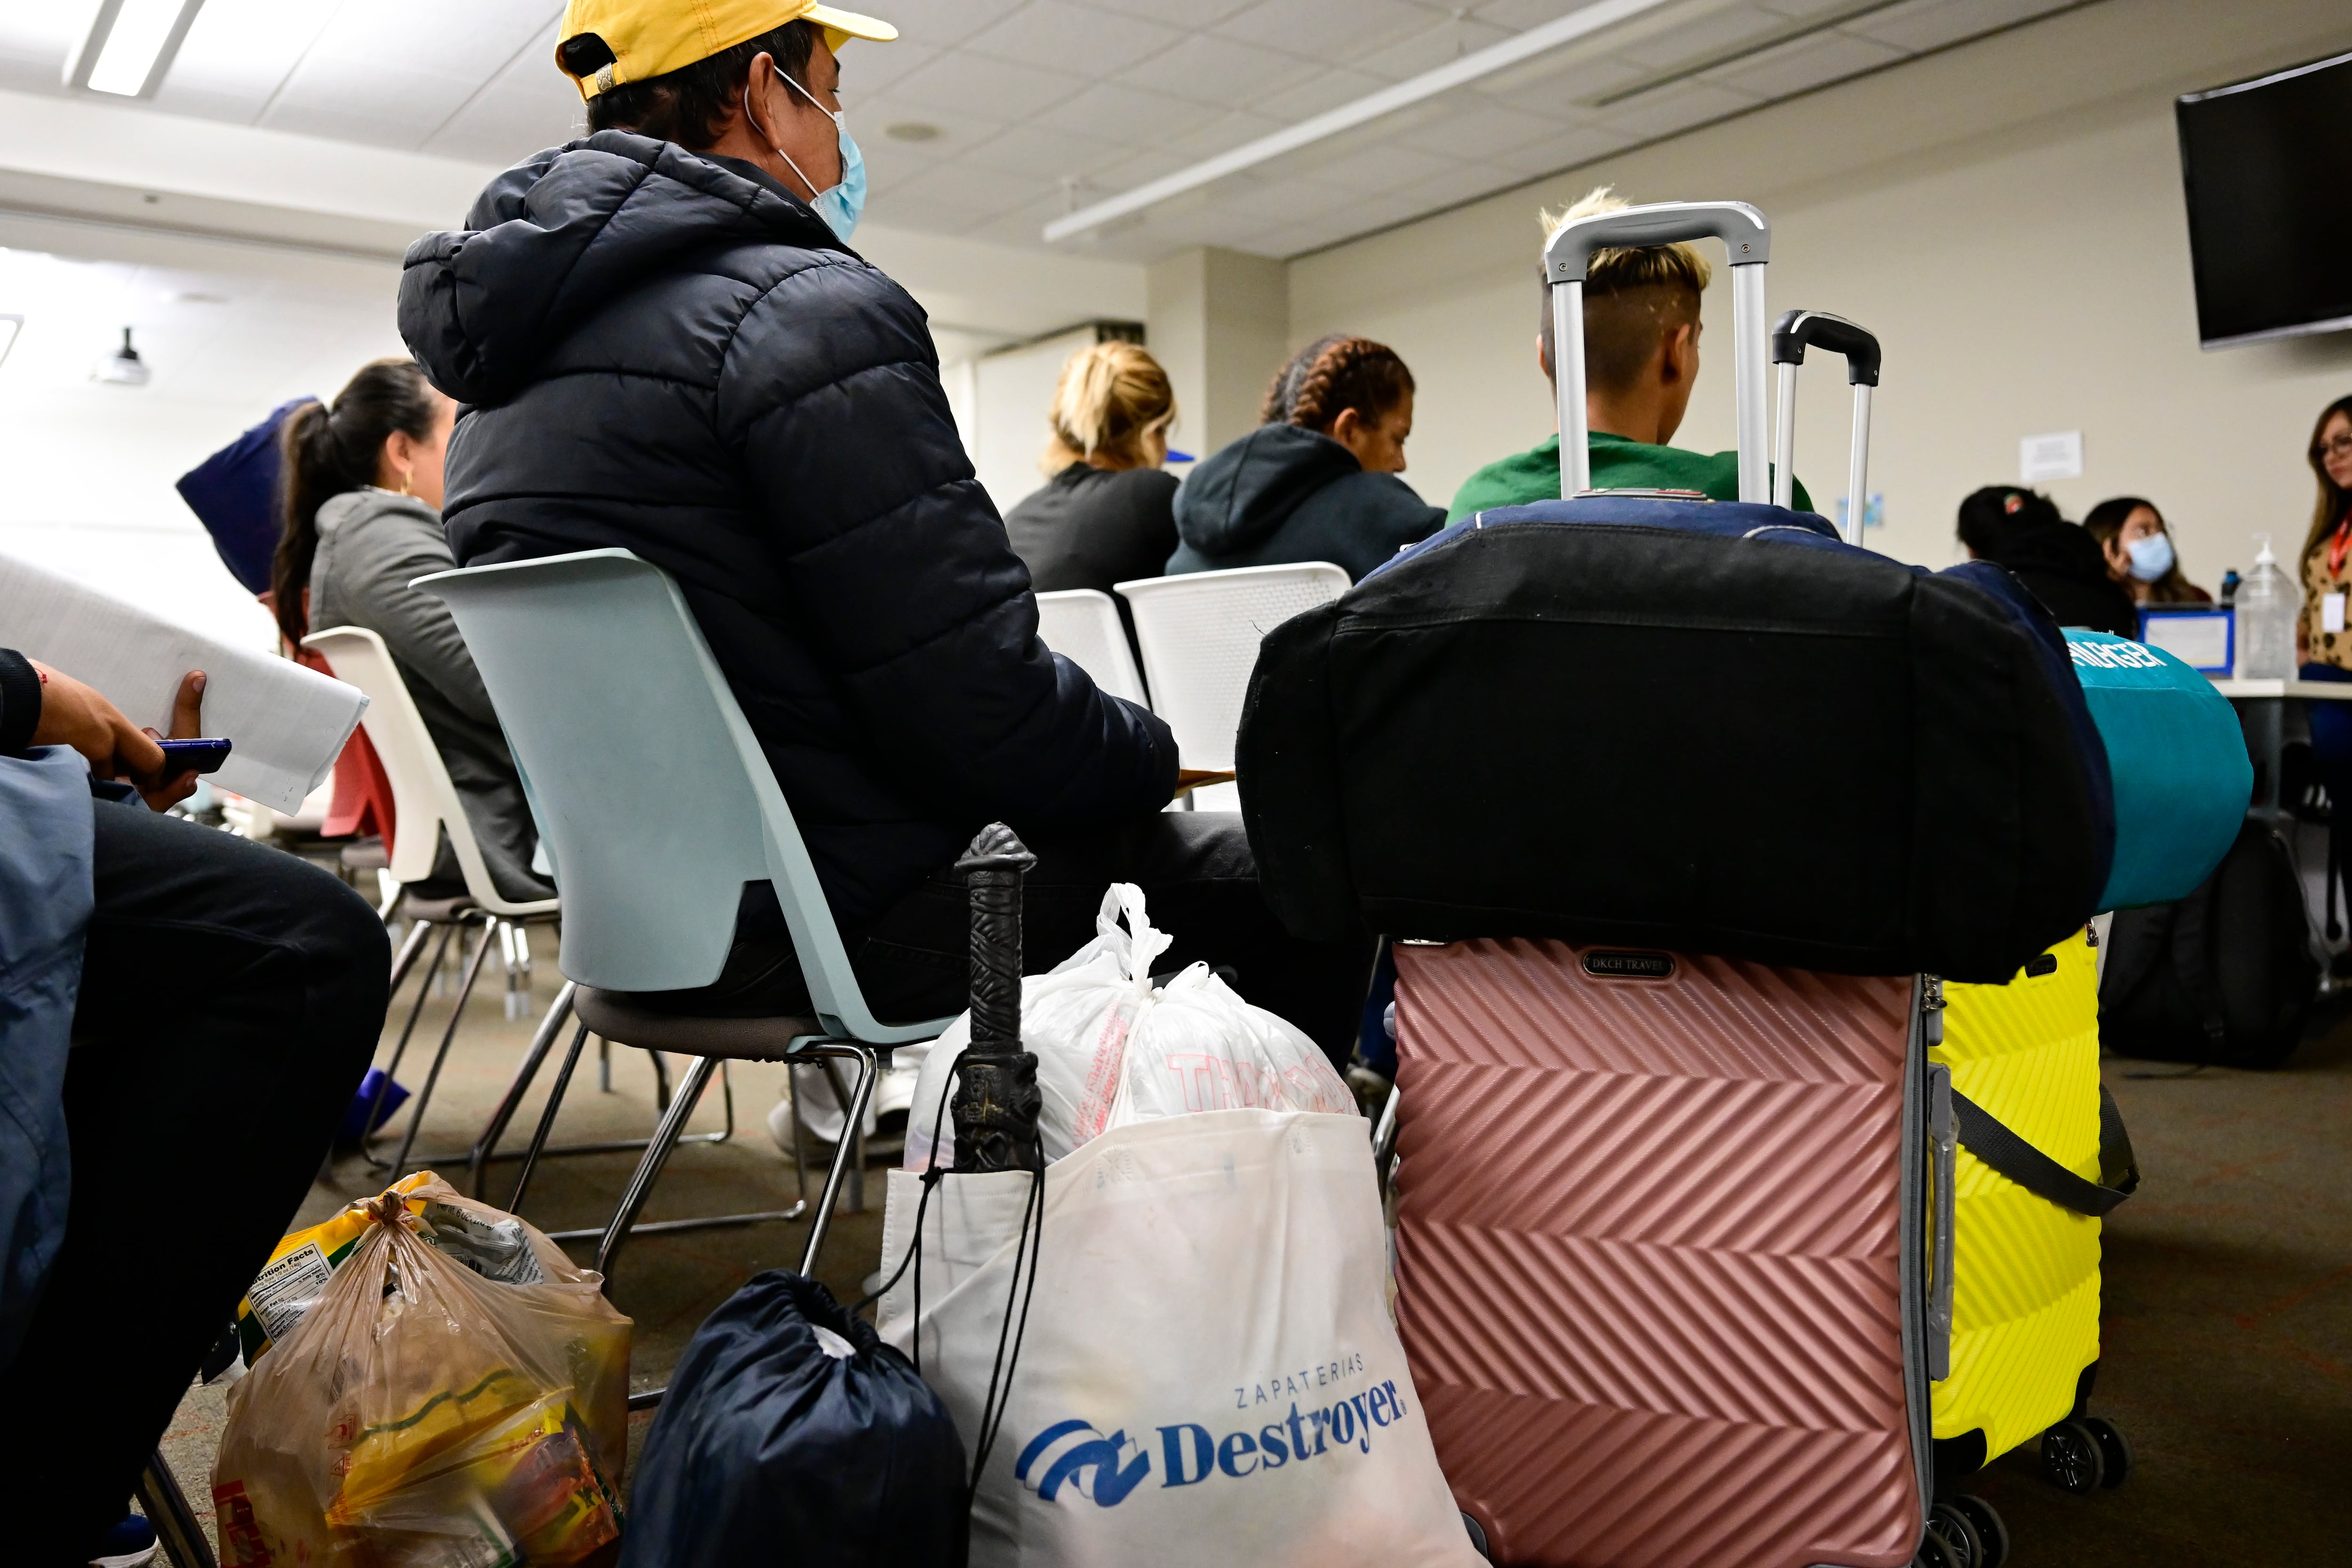 Bags of different sizes and a pink suitcase sit in front of a person sitting in a chair wearing a black jacket and a yellow cap. People sit in chairs waiting in the background.